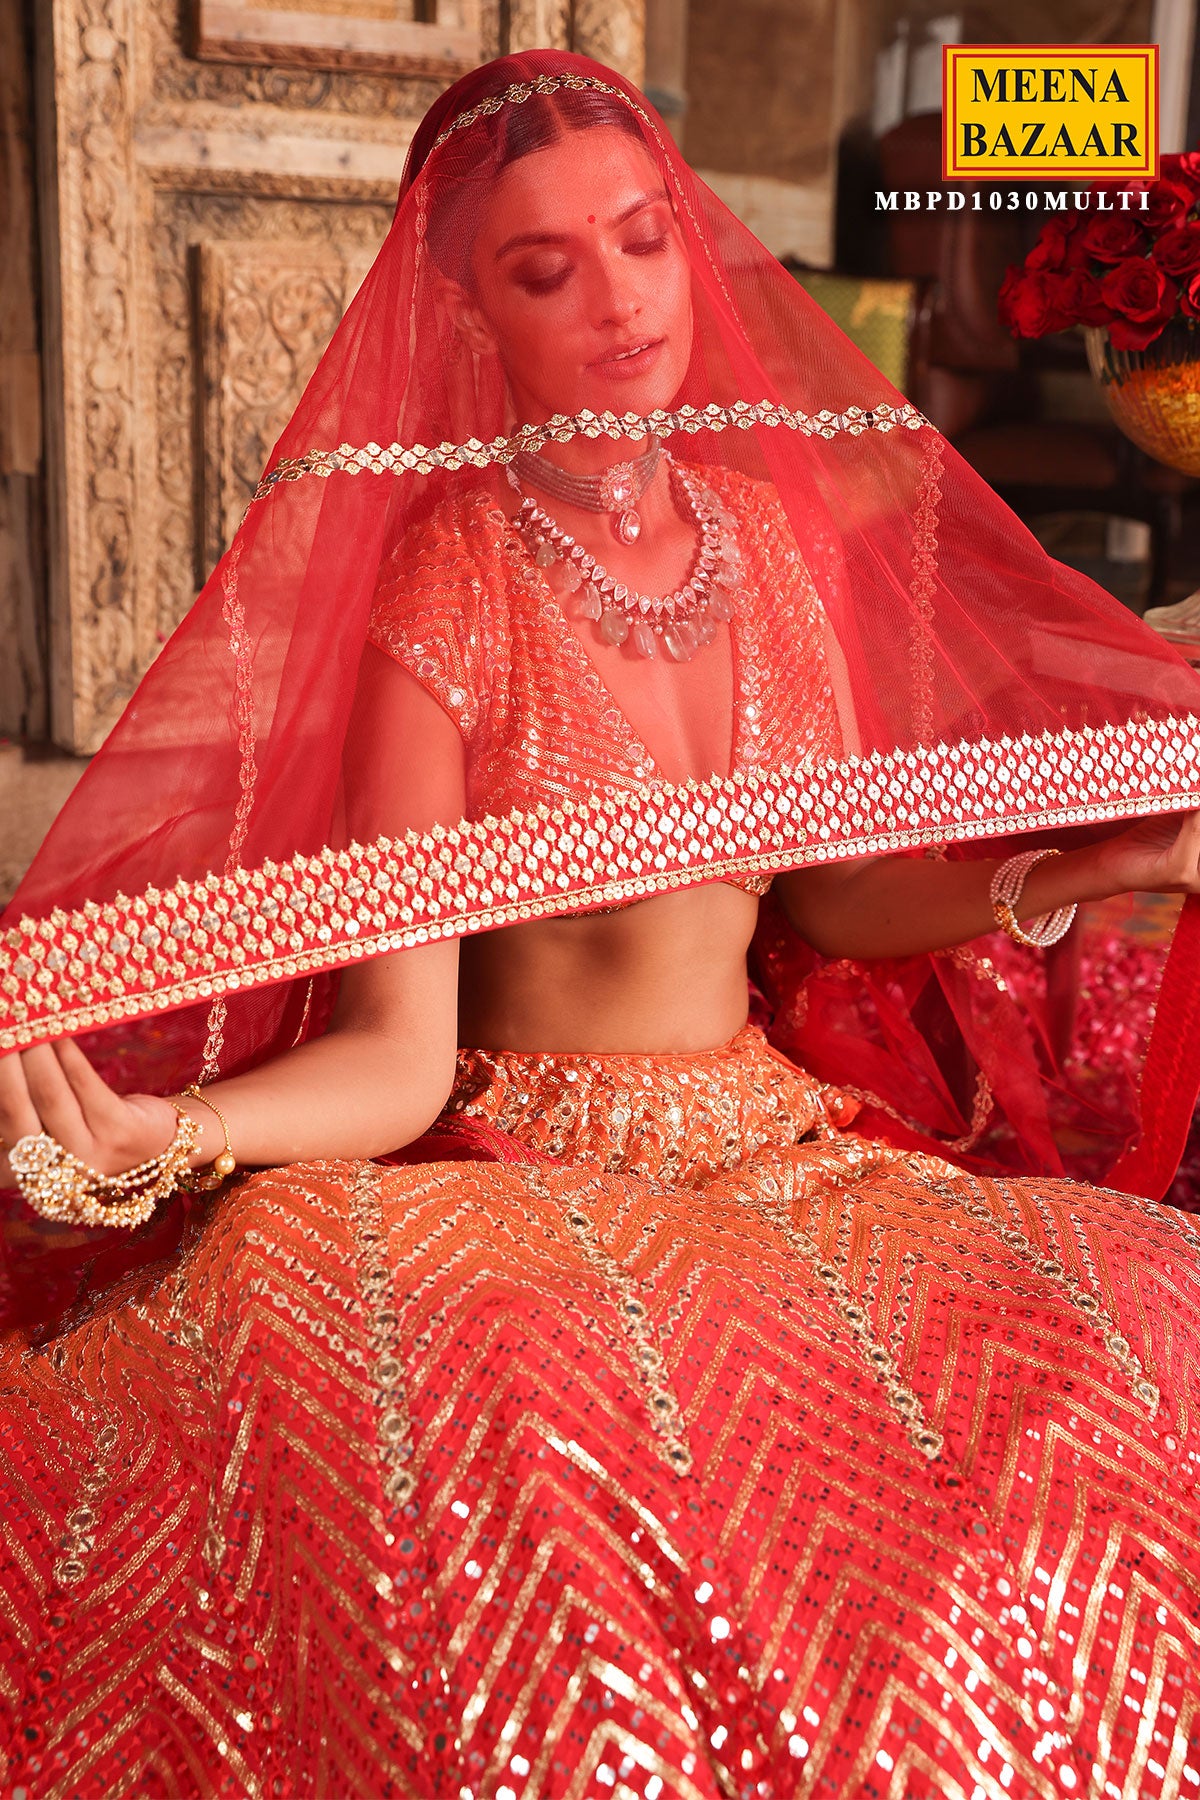 Travel Articles | Travel Blogs | Travel News & Information | Travel Guide |  India.comWedding Season? Here Are 7 Best Places to Buy Lehengas From in  Delhi